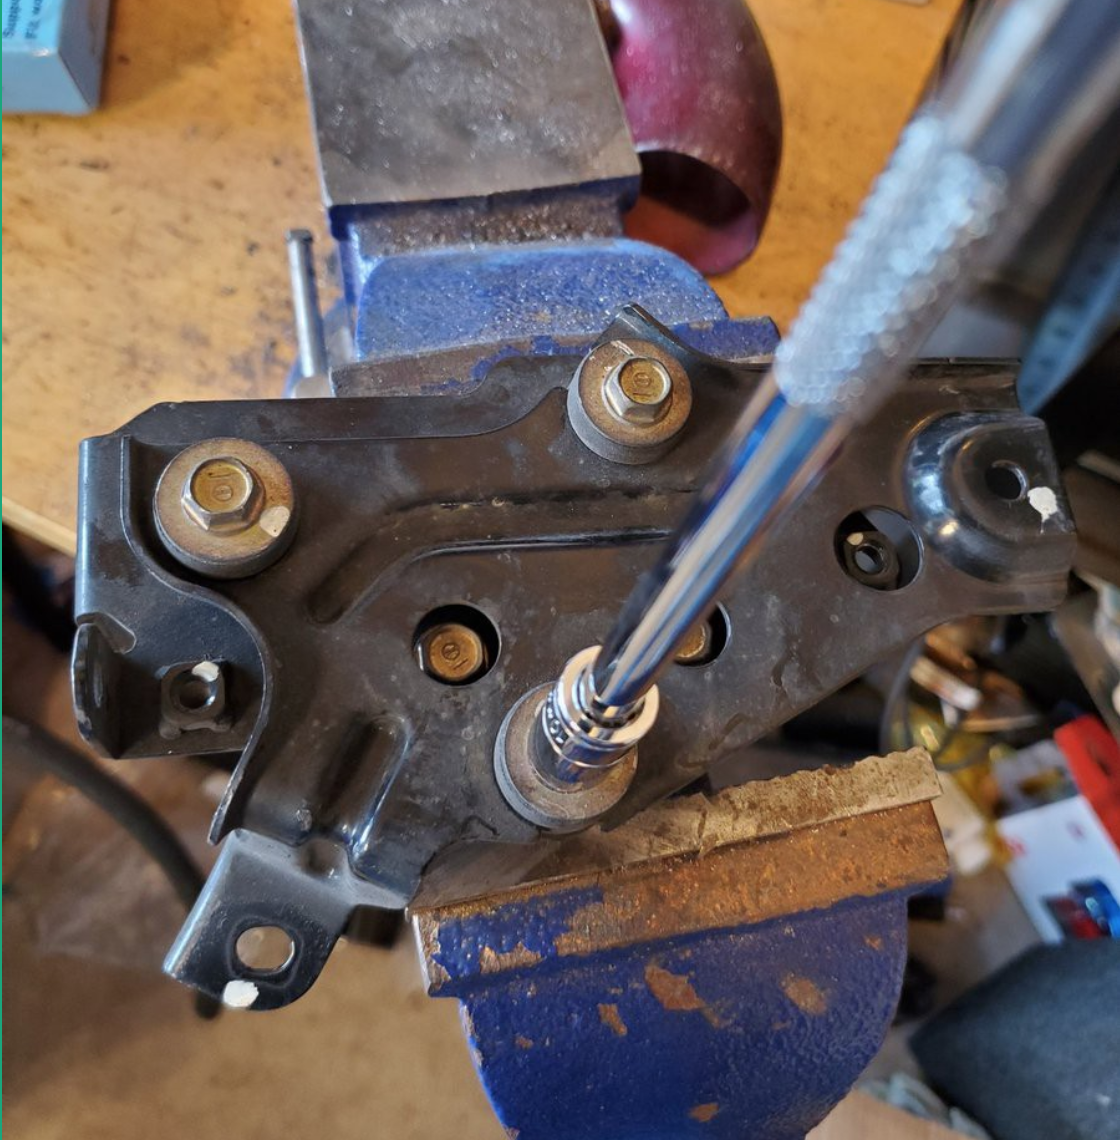 Bracket in vice with socket on bolt about to be removed.